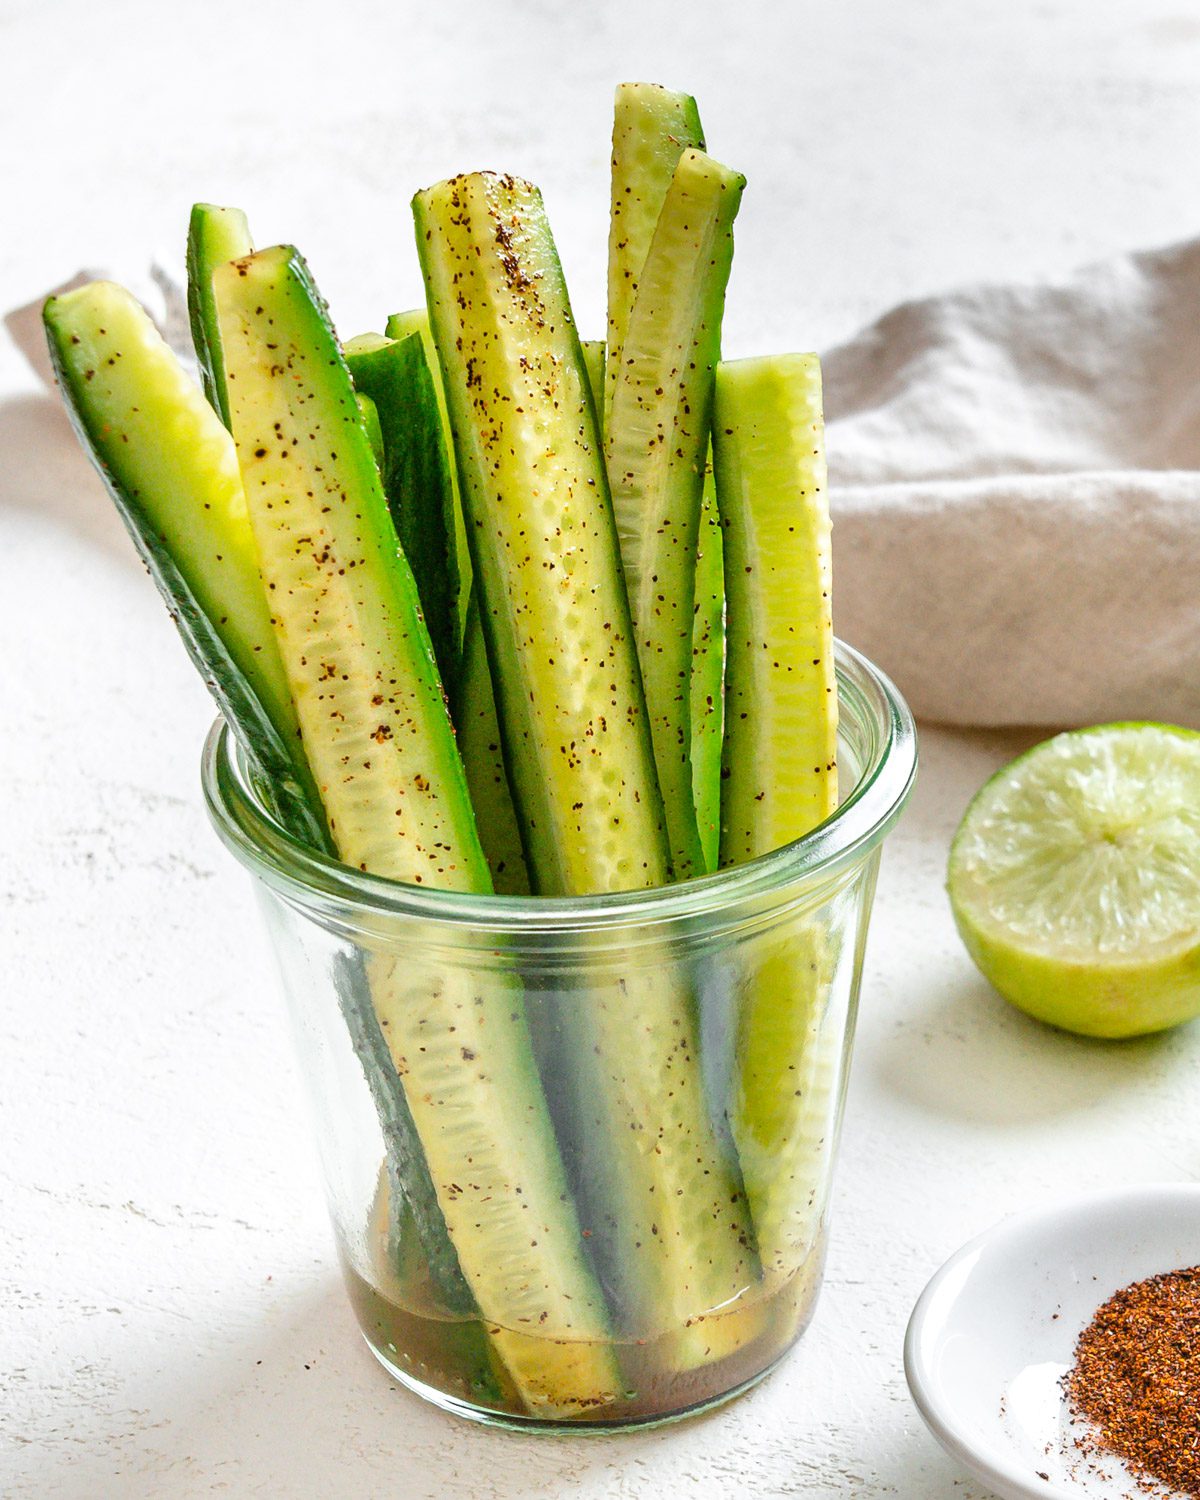 completed Cucumbers with Tajin in a clear glass against a light background